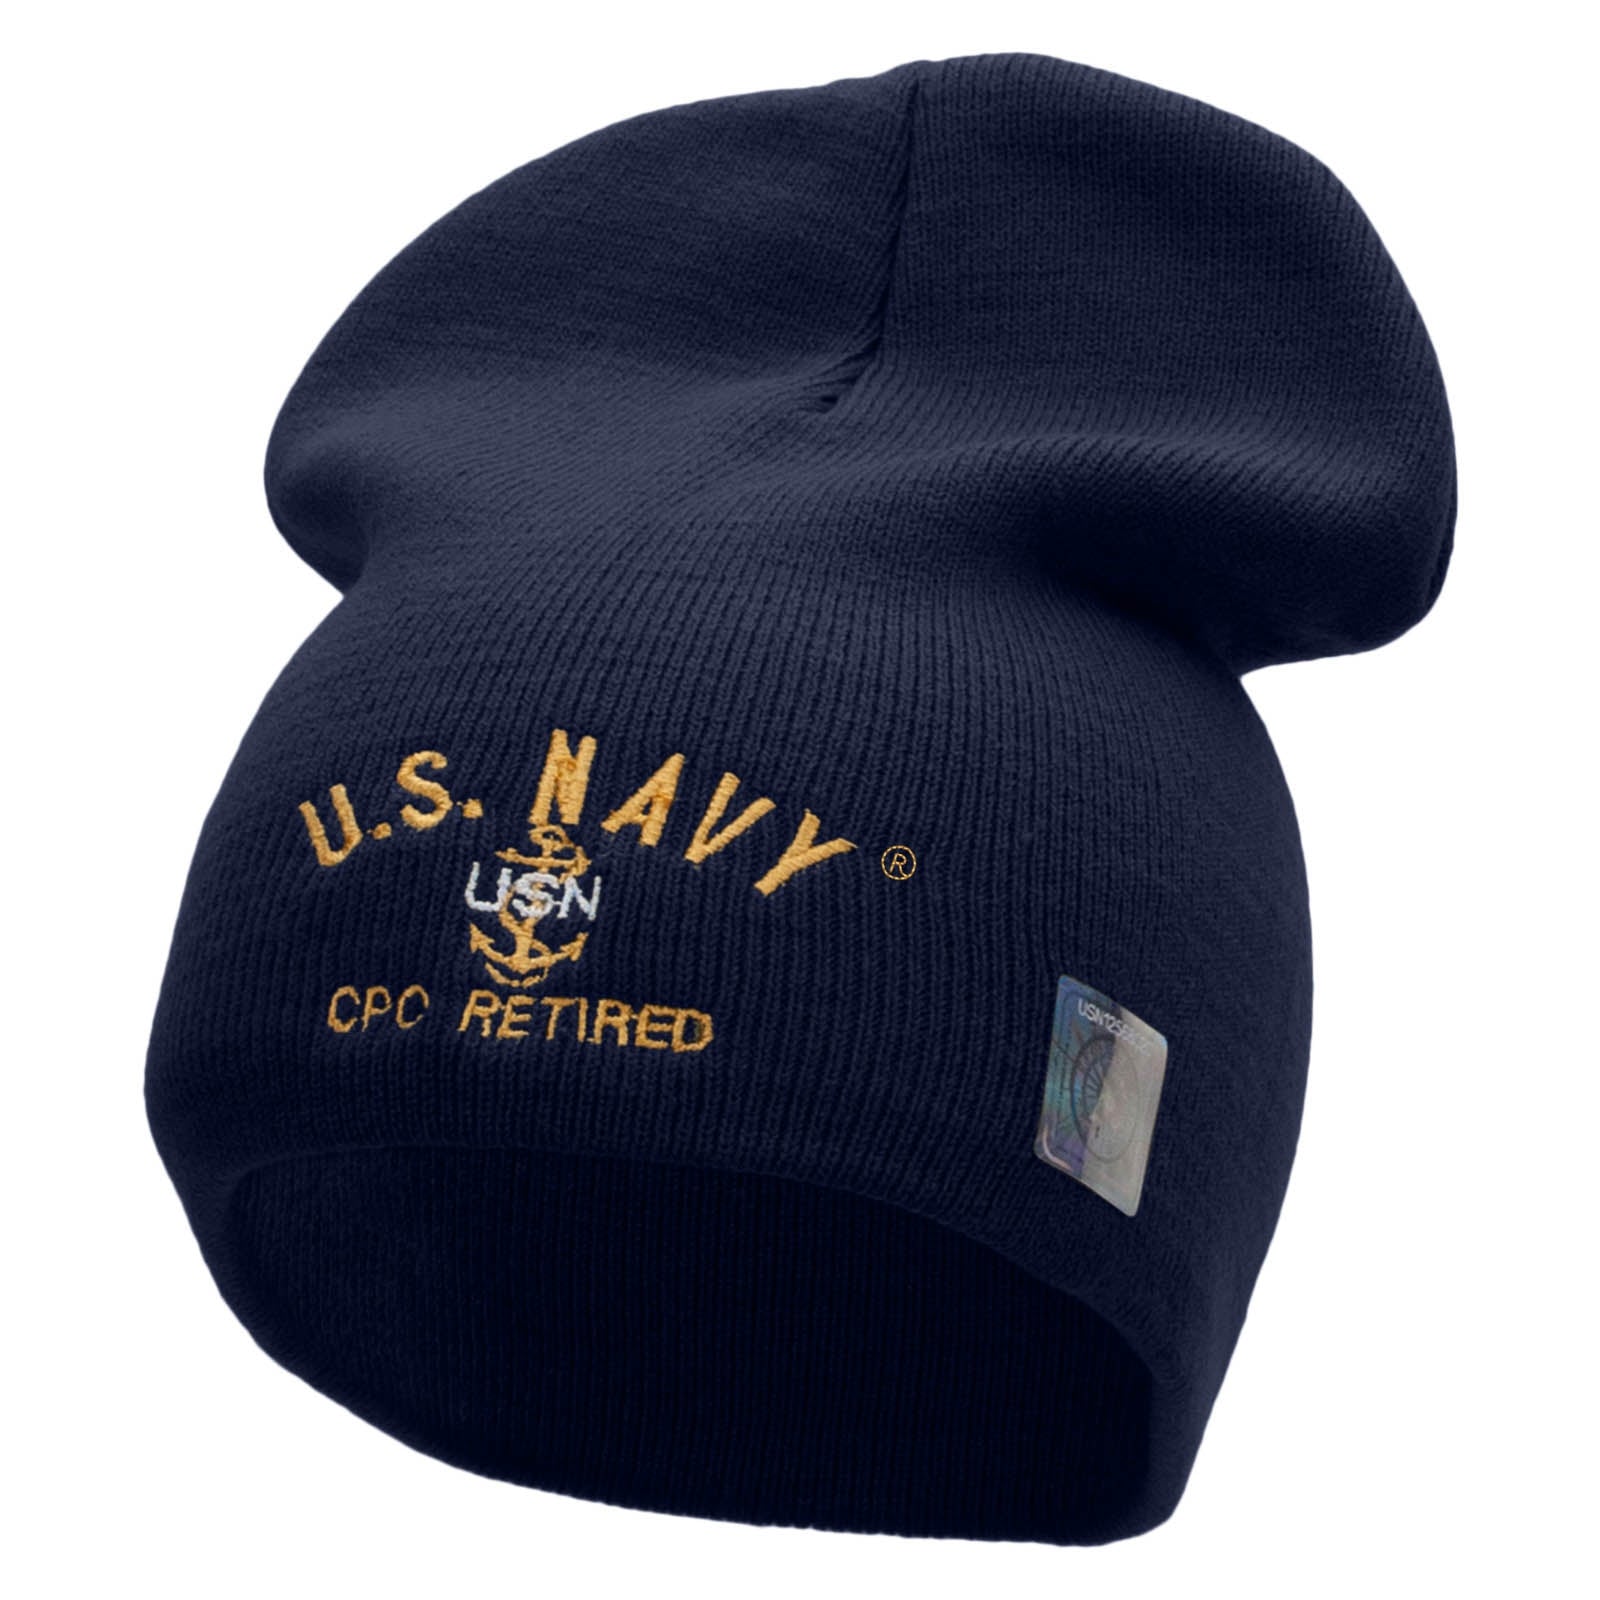 Licensed US Navy CPO Retired Embroidered Short Beanie Made in USA - Navy OSFM